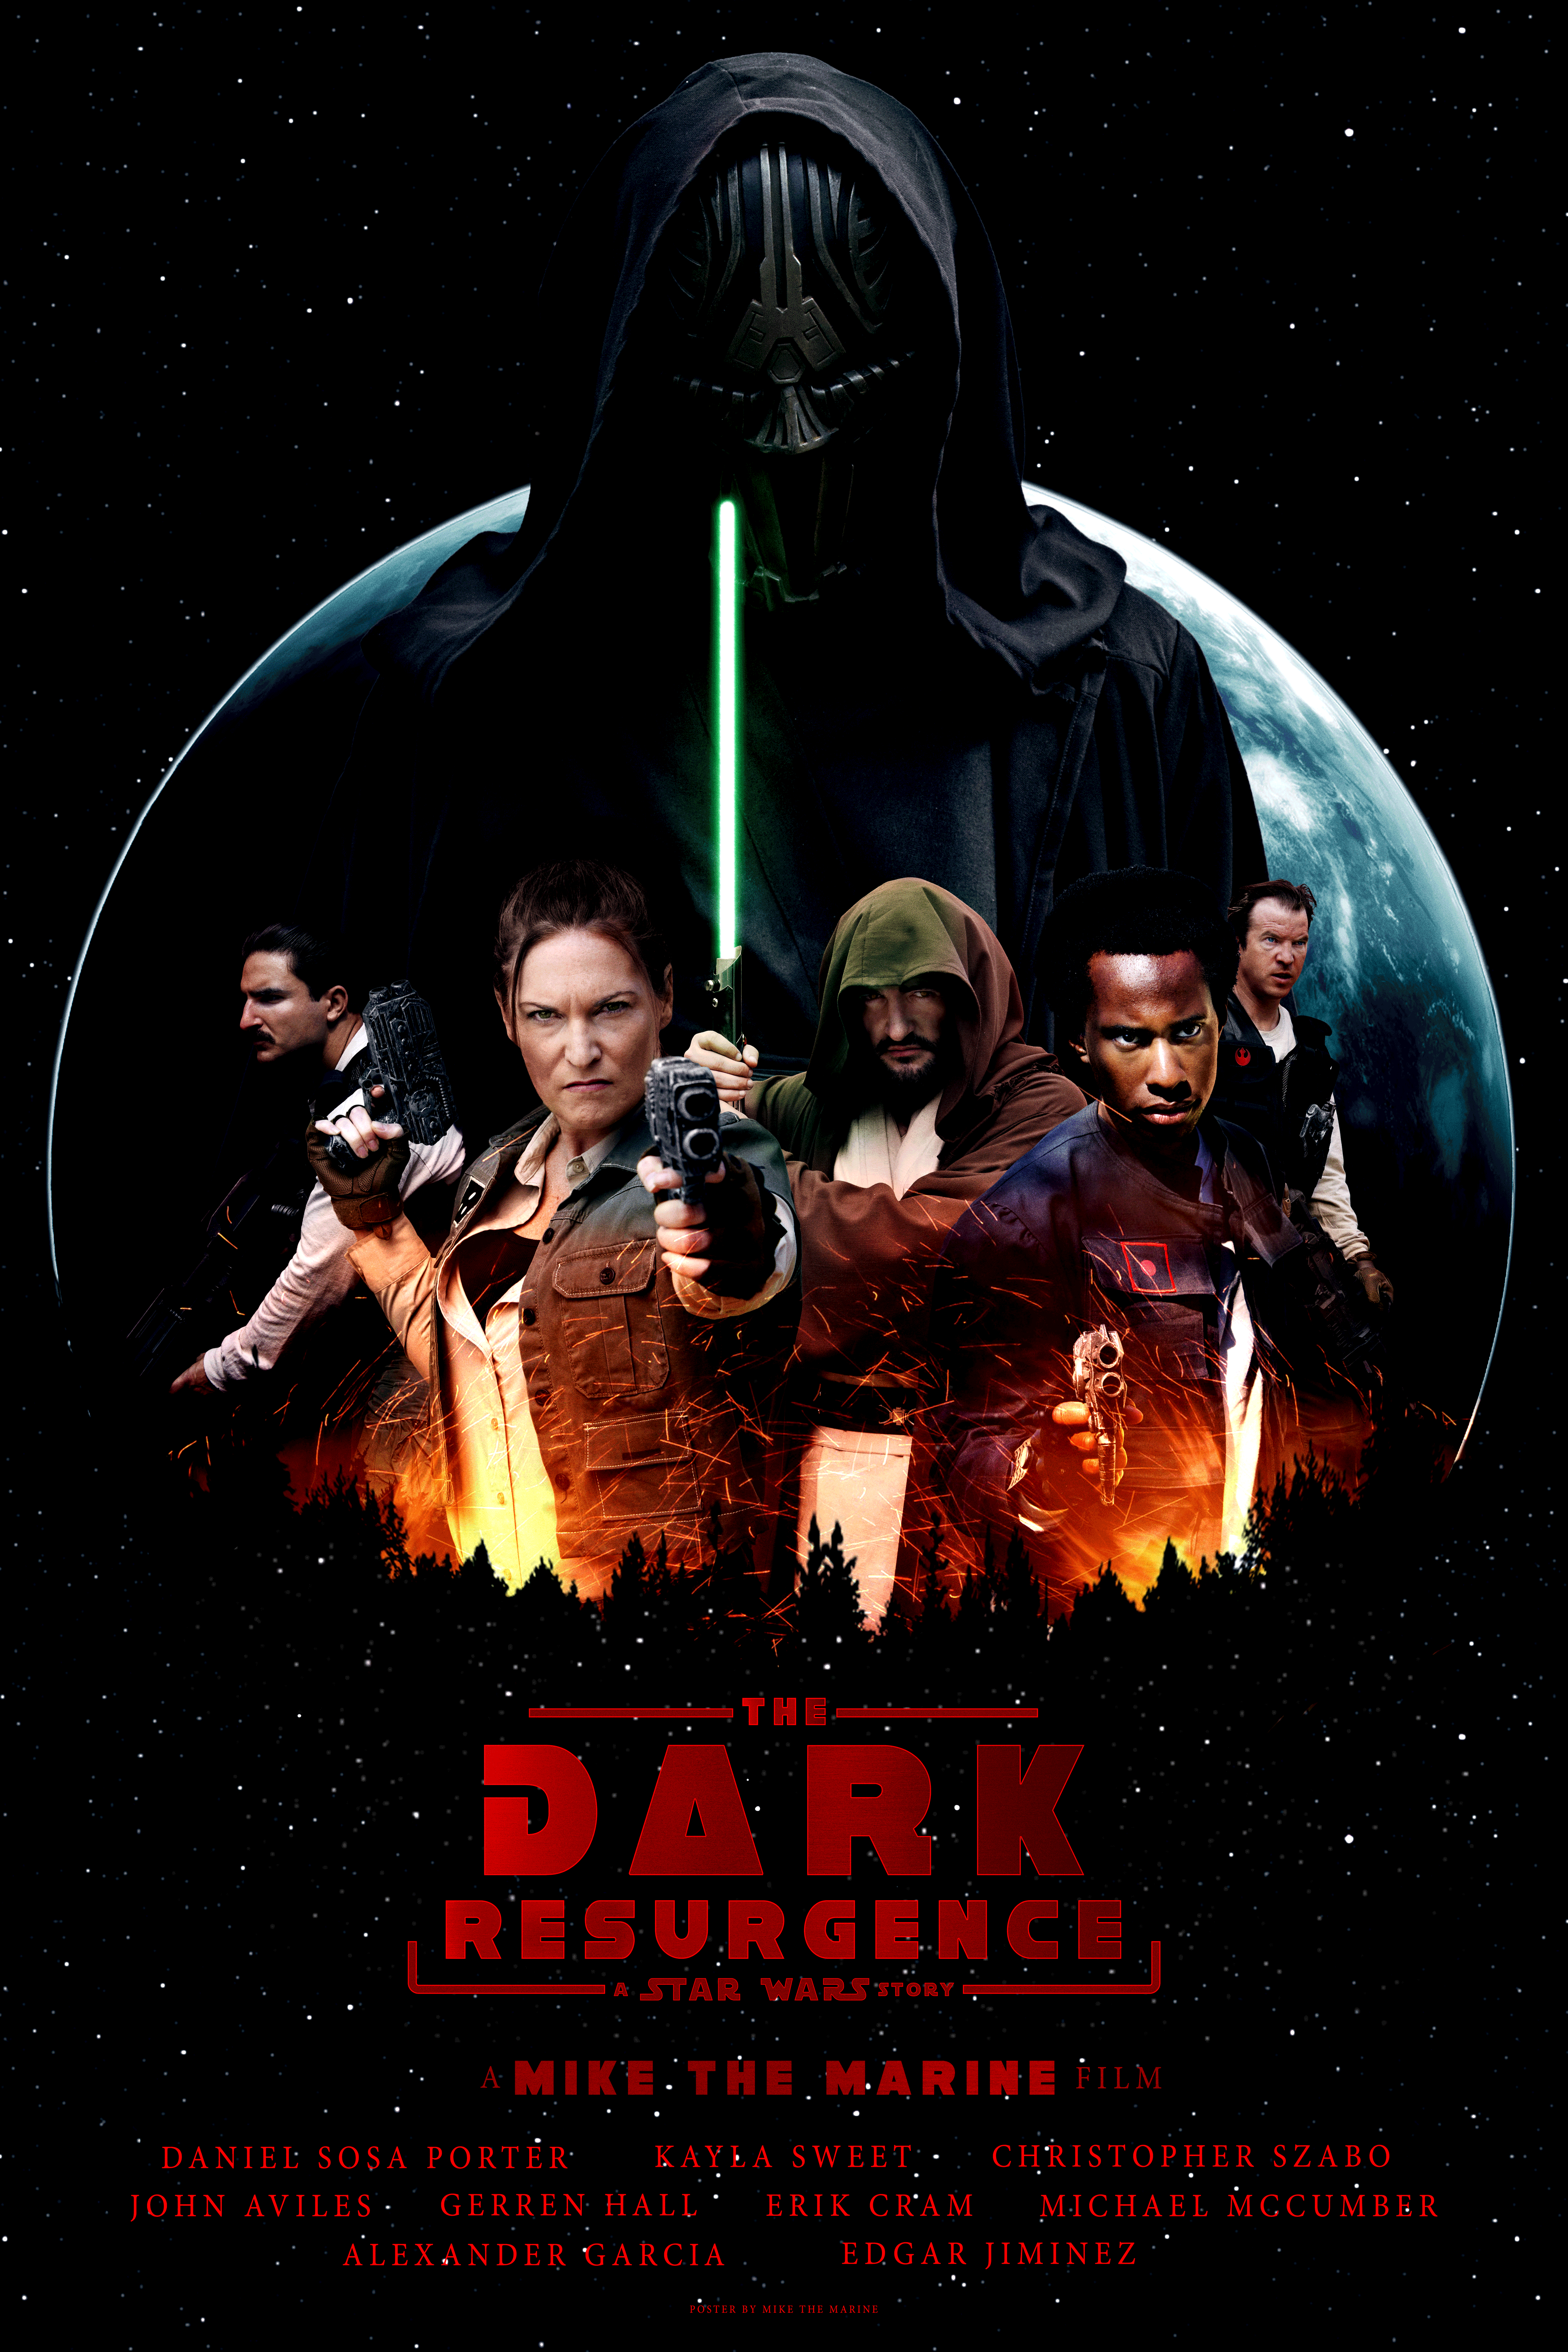 DarkRBLX on X: Made a unofficial fan concept movie poster for the